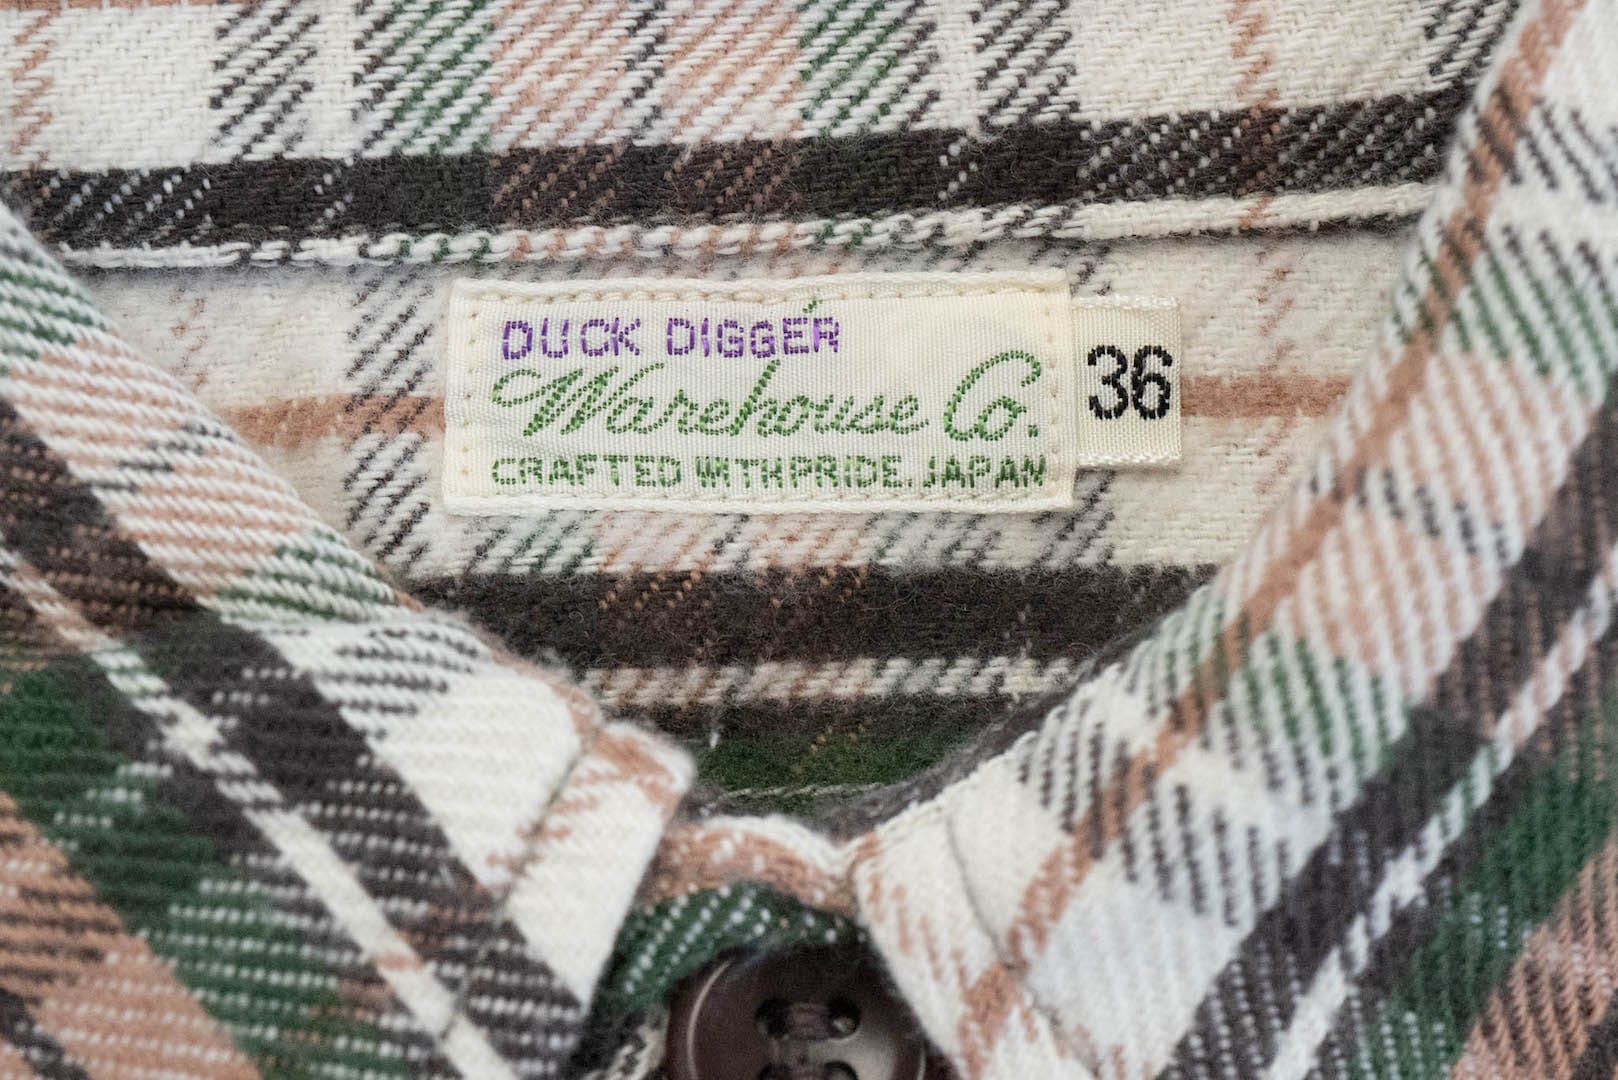 Warehouse Co 10oz 'Duck Digger' Selvage Flannel Early Workshirt (Salmon)